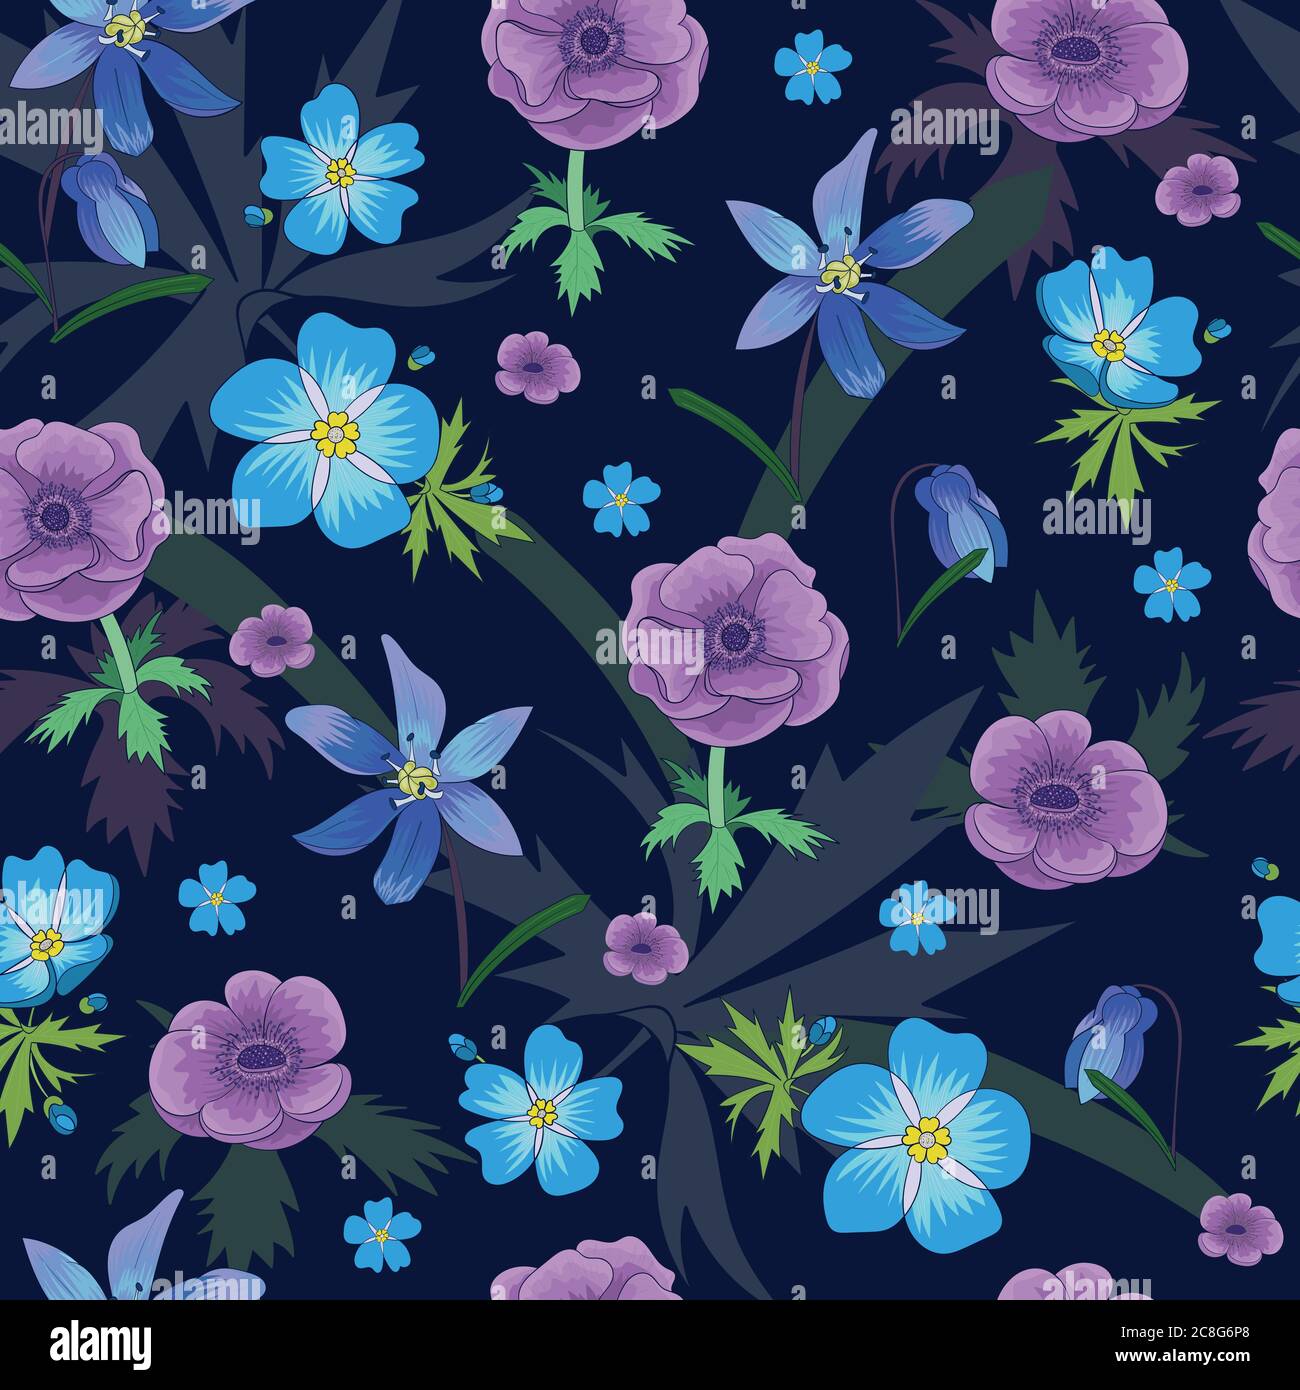 Seamless floral pattern with of anemones, scilla, forget-me-not on dark background. Vector illustration Stock Vector